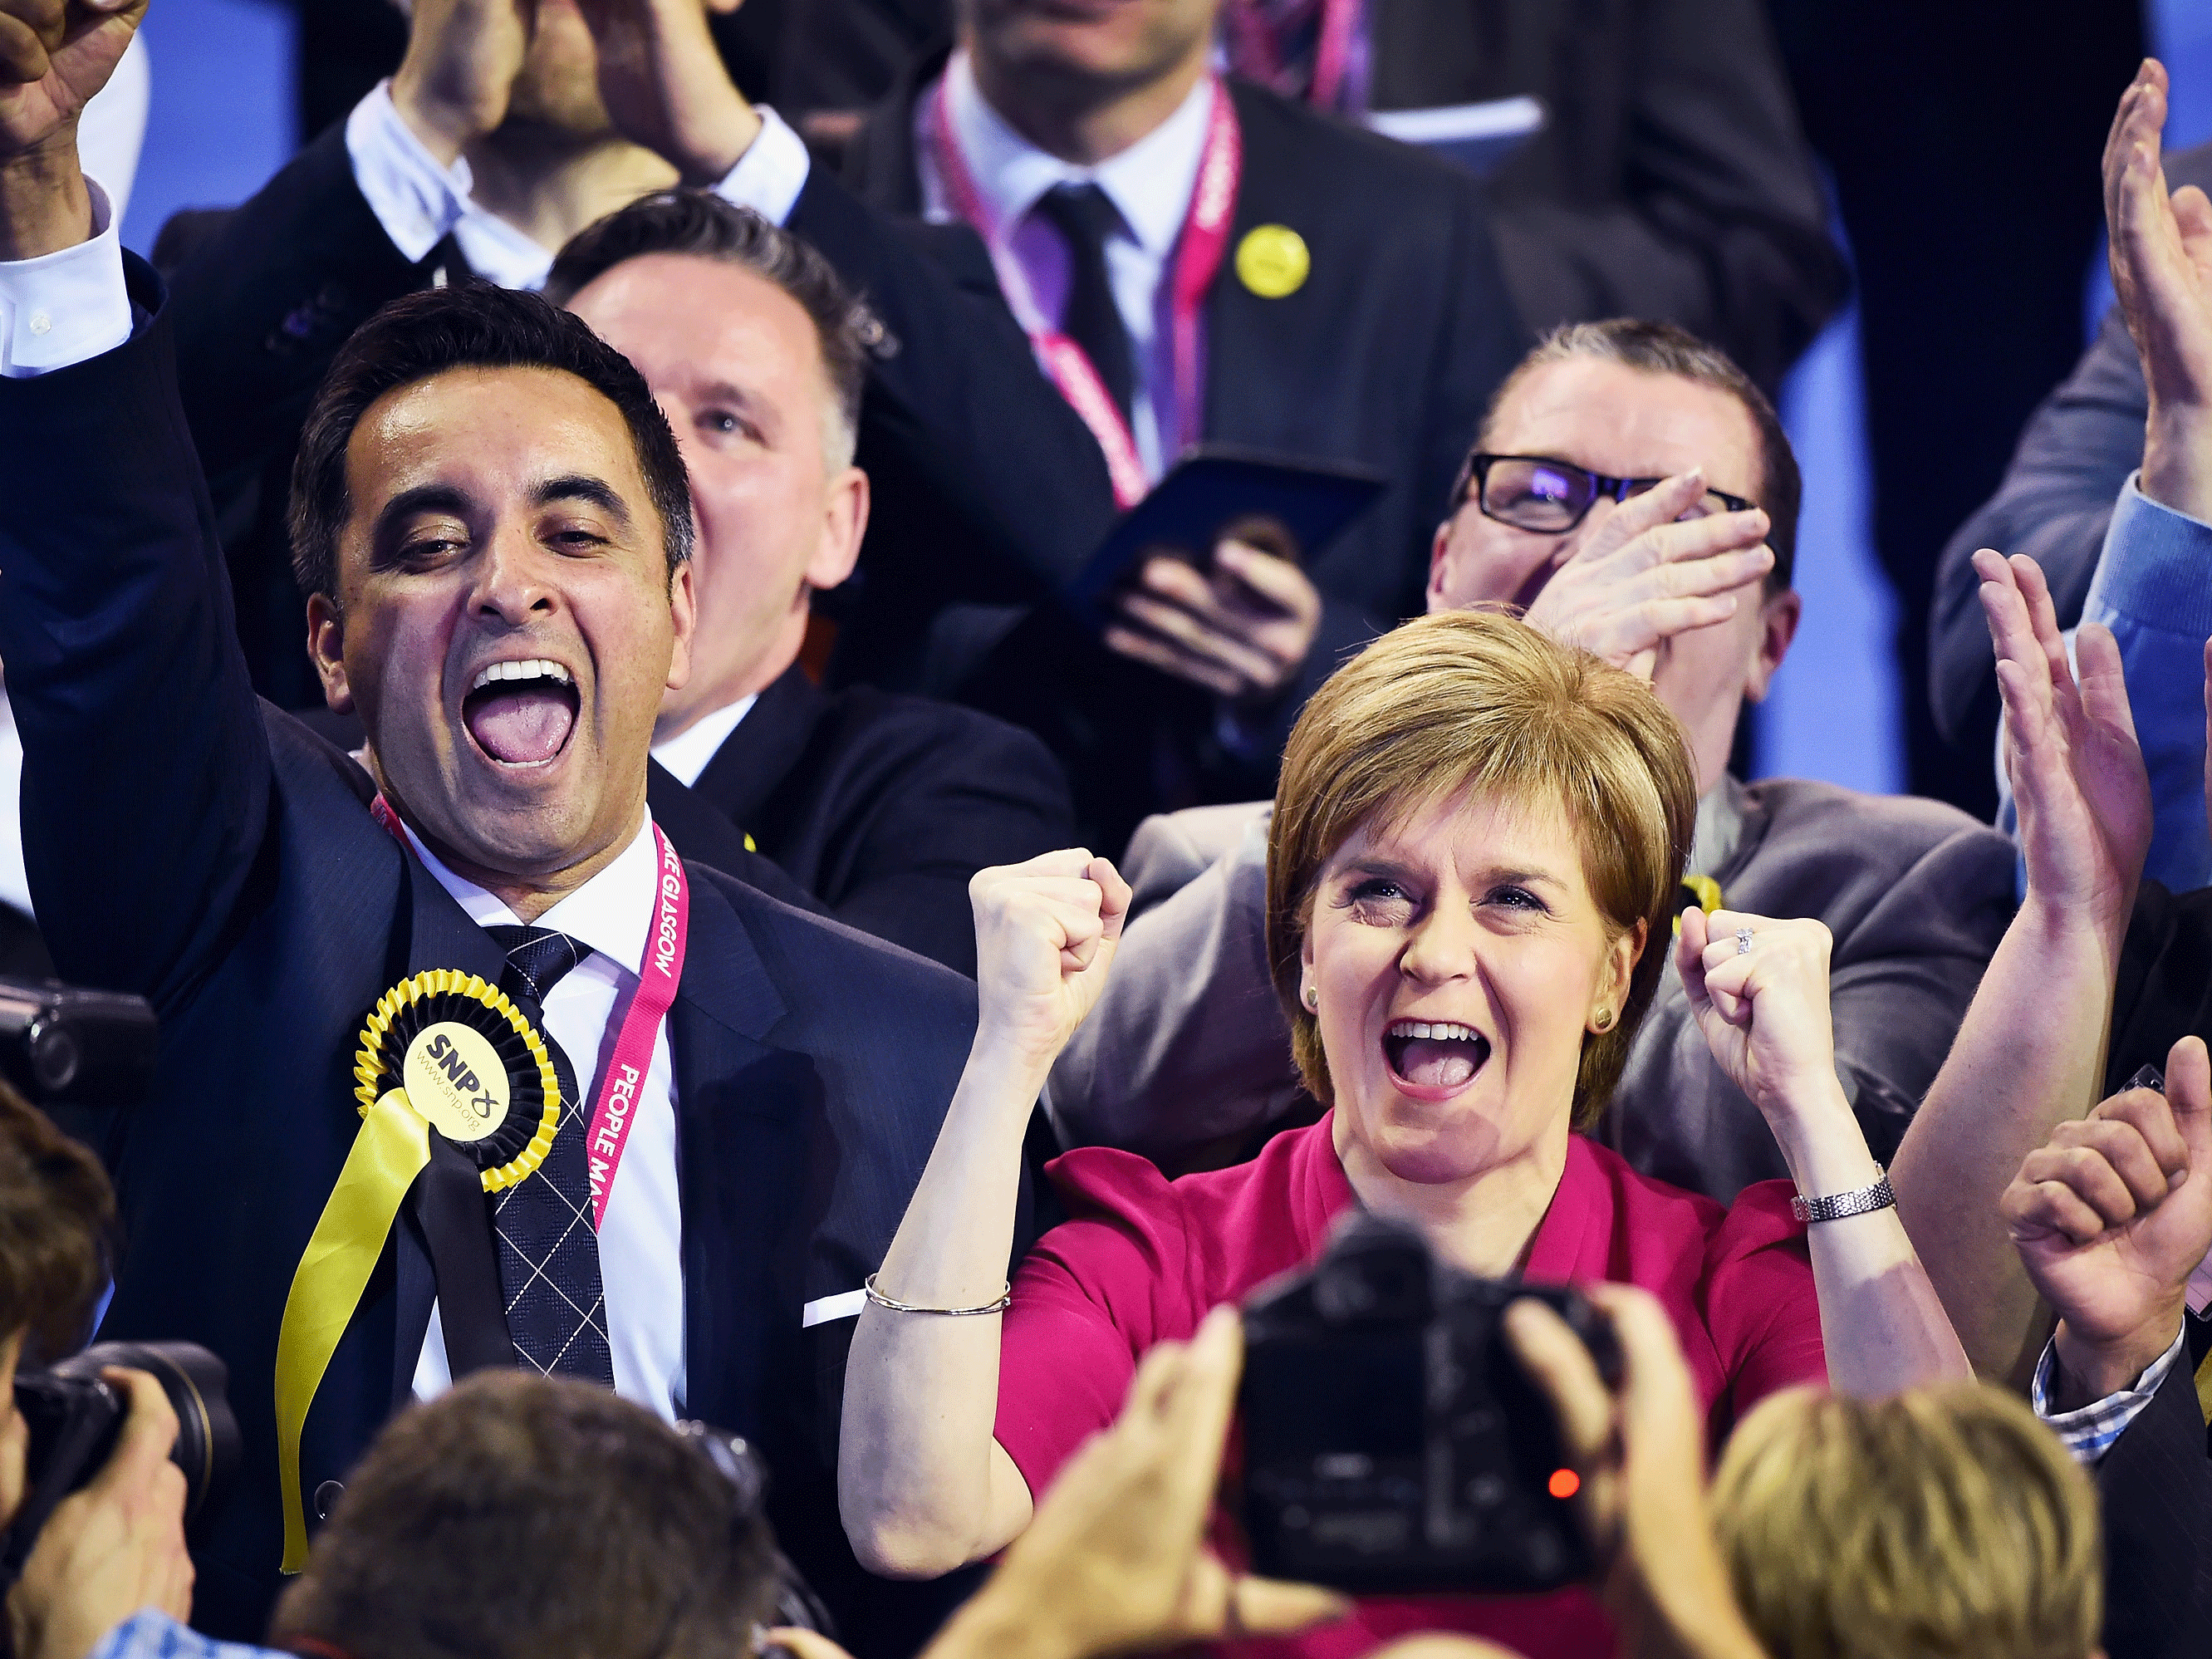 Leader of the SNP Nicola Sturgeon celebrates during the Glasgow declarations on May 8, 2015 in Glasgow, Scotland.